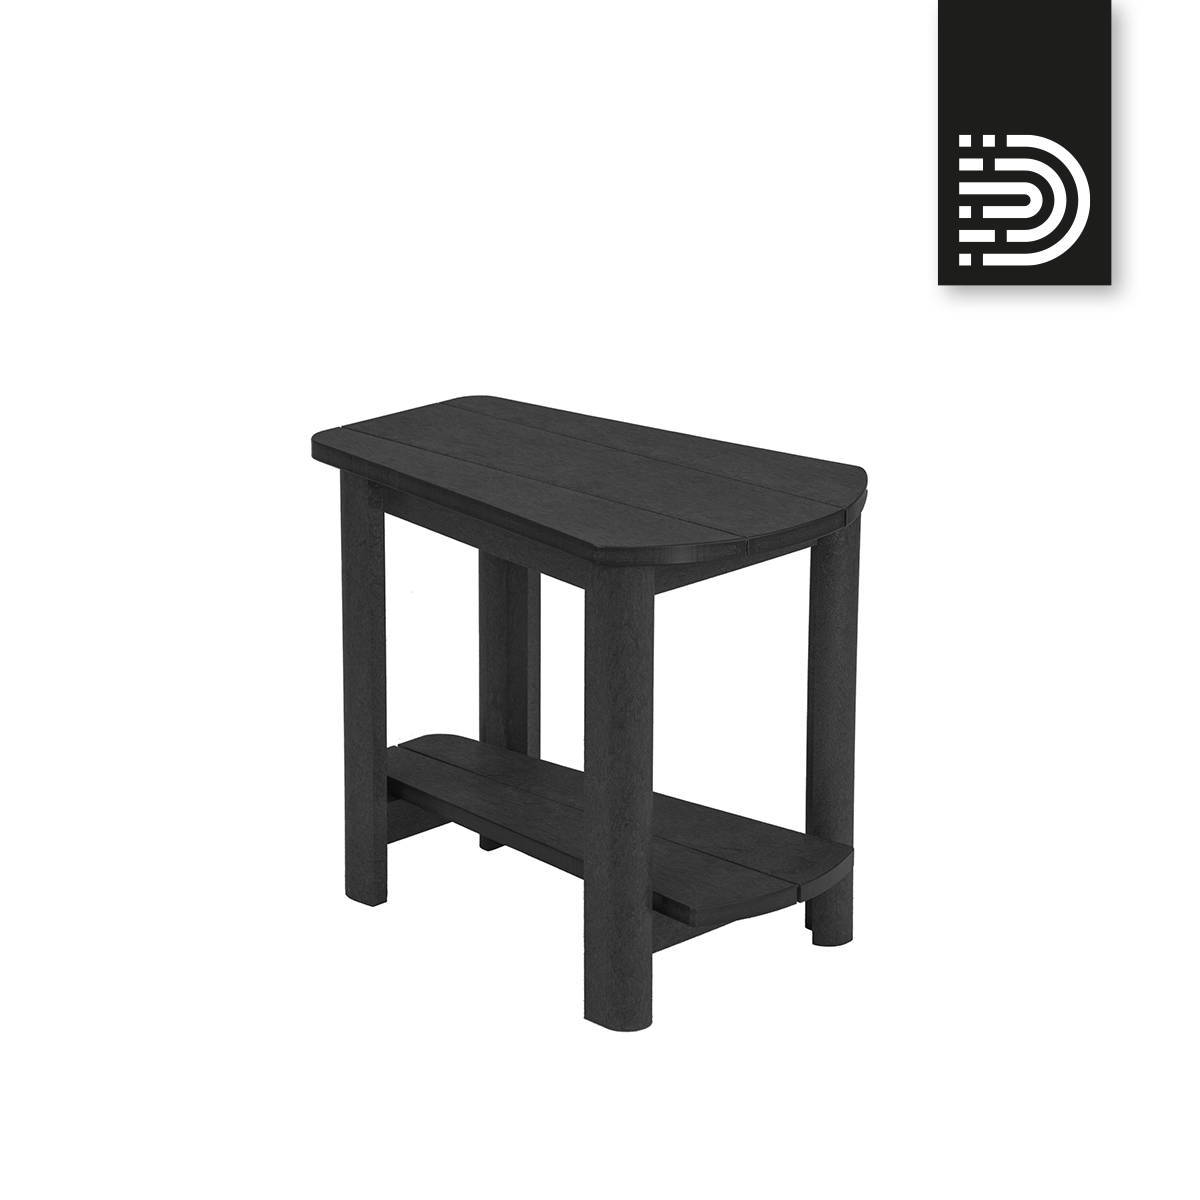 T04 Addy Side Table - black 14